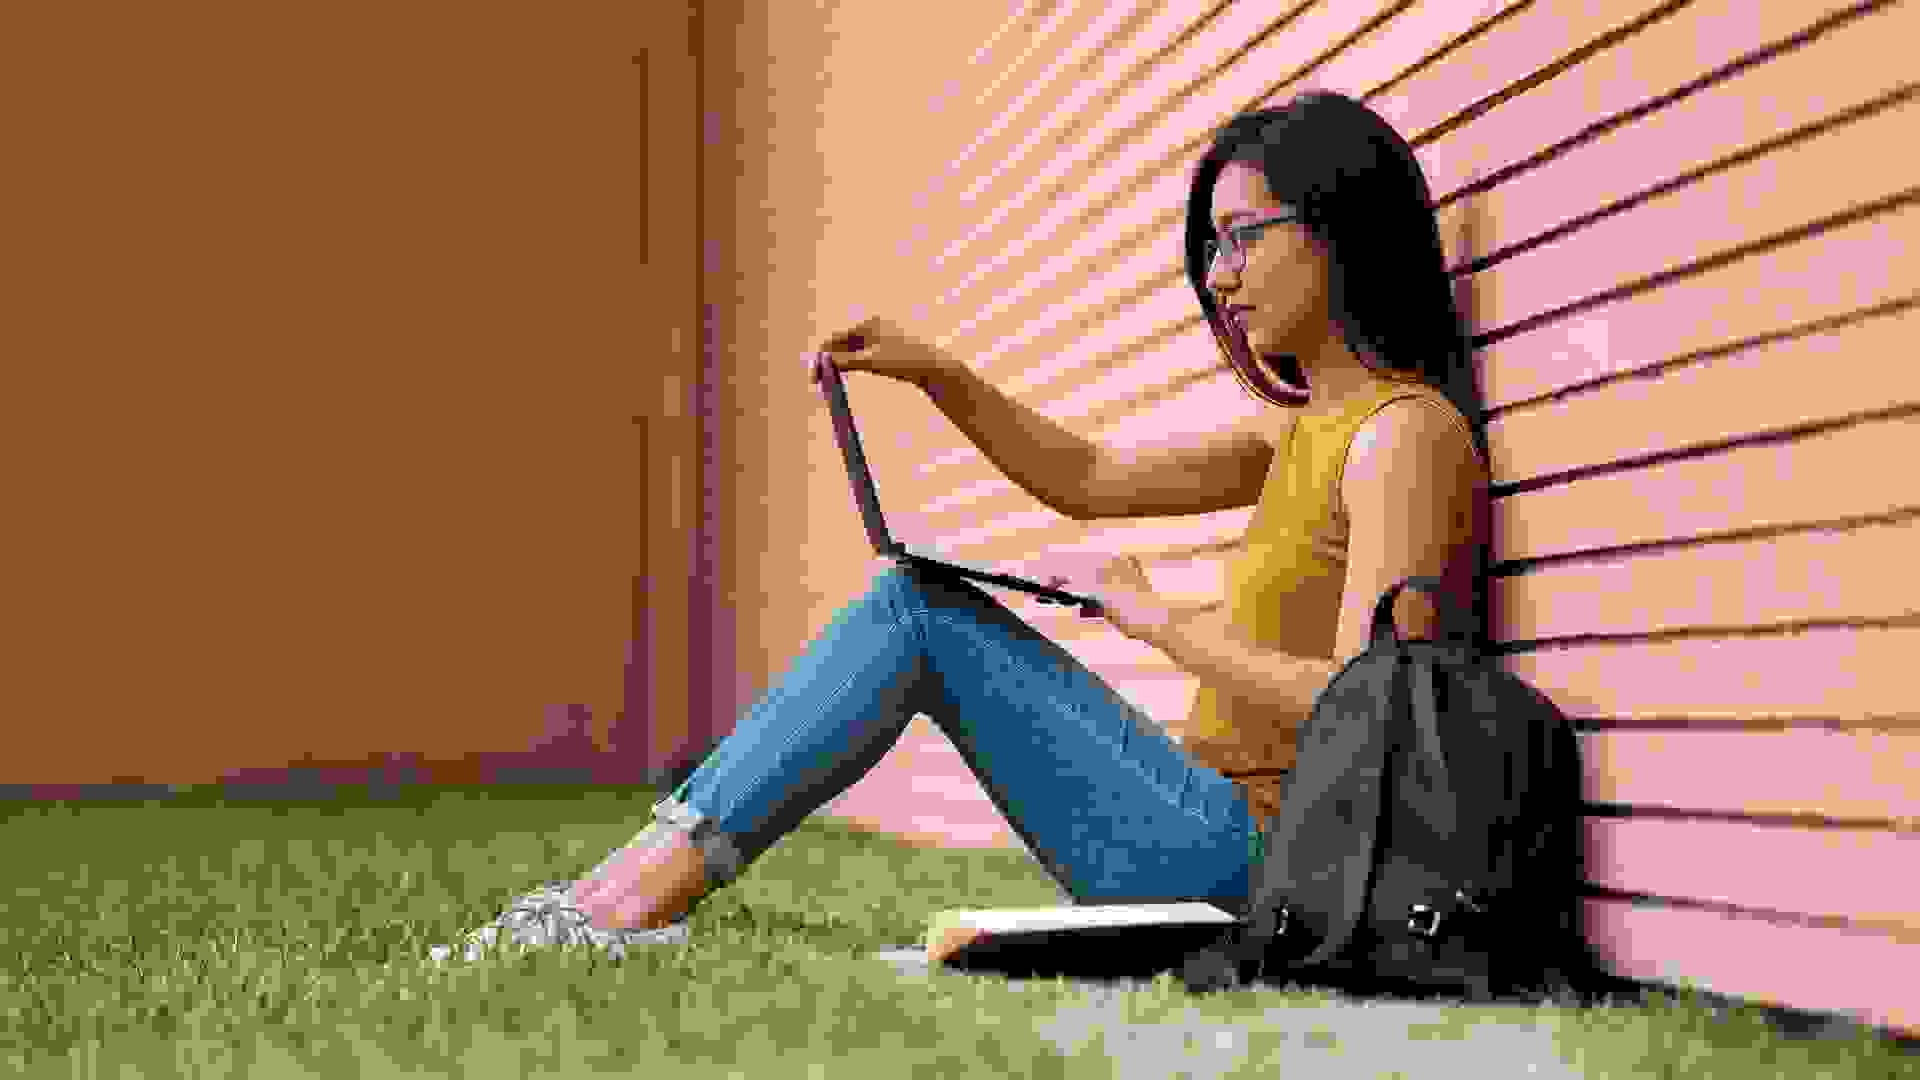 Sideview, Laptop, Sitting, Young Woman, Student, Campus, Outdoors,.